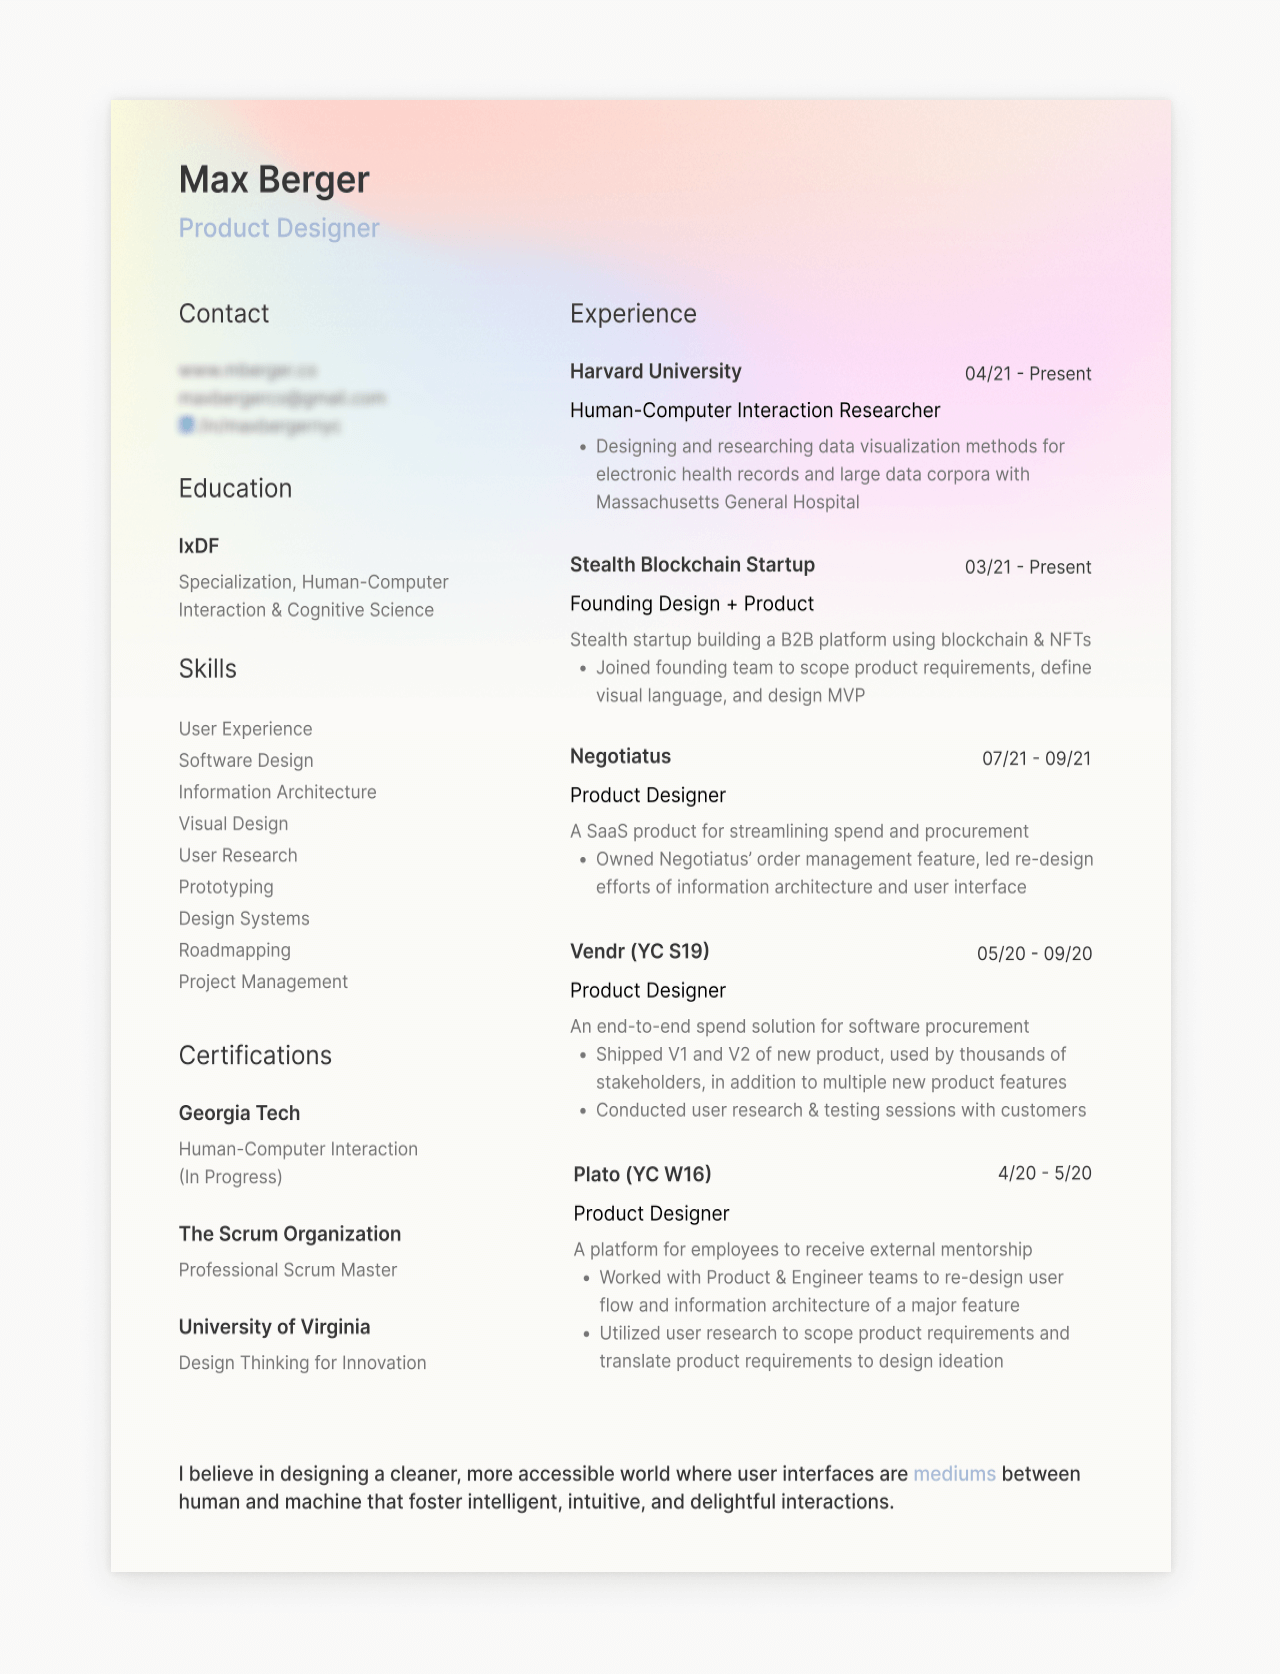 Screenshot of a UX resume by Max Berger